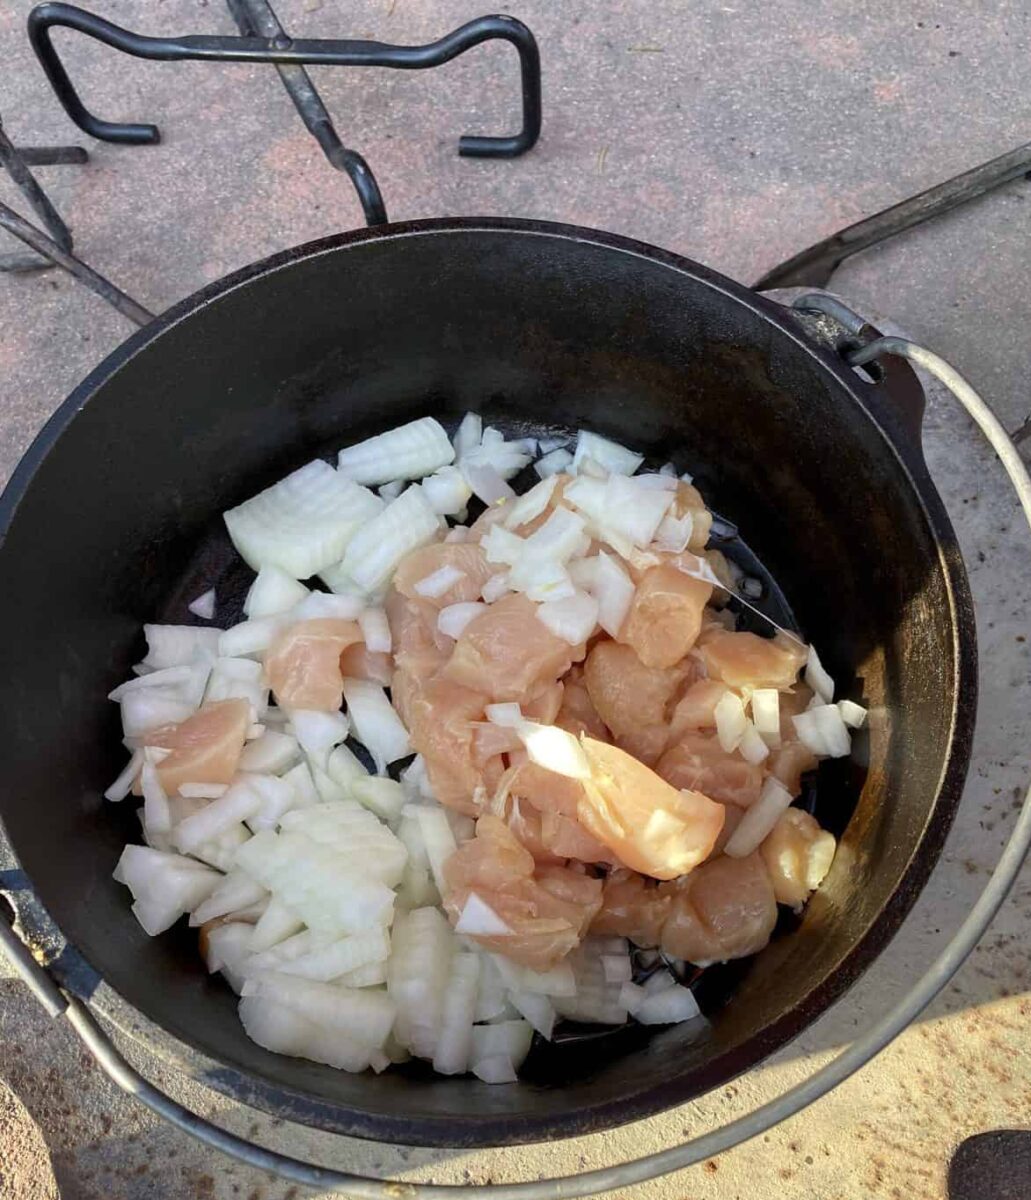 Diced chicken and chopped onions in a Dutch Oven.